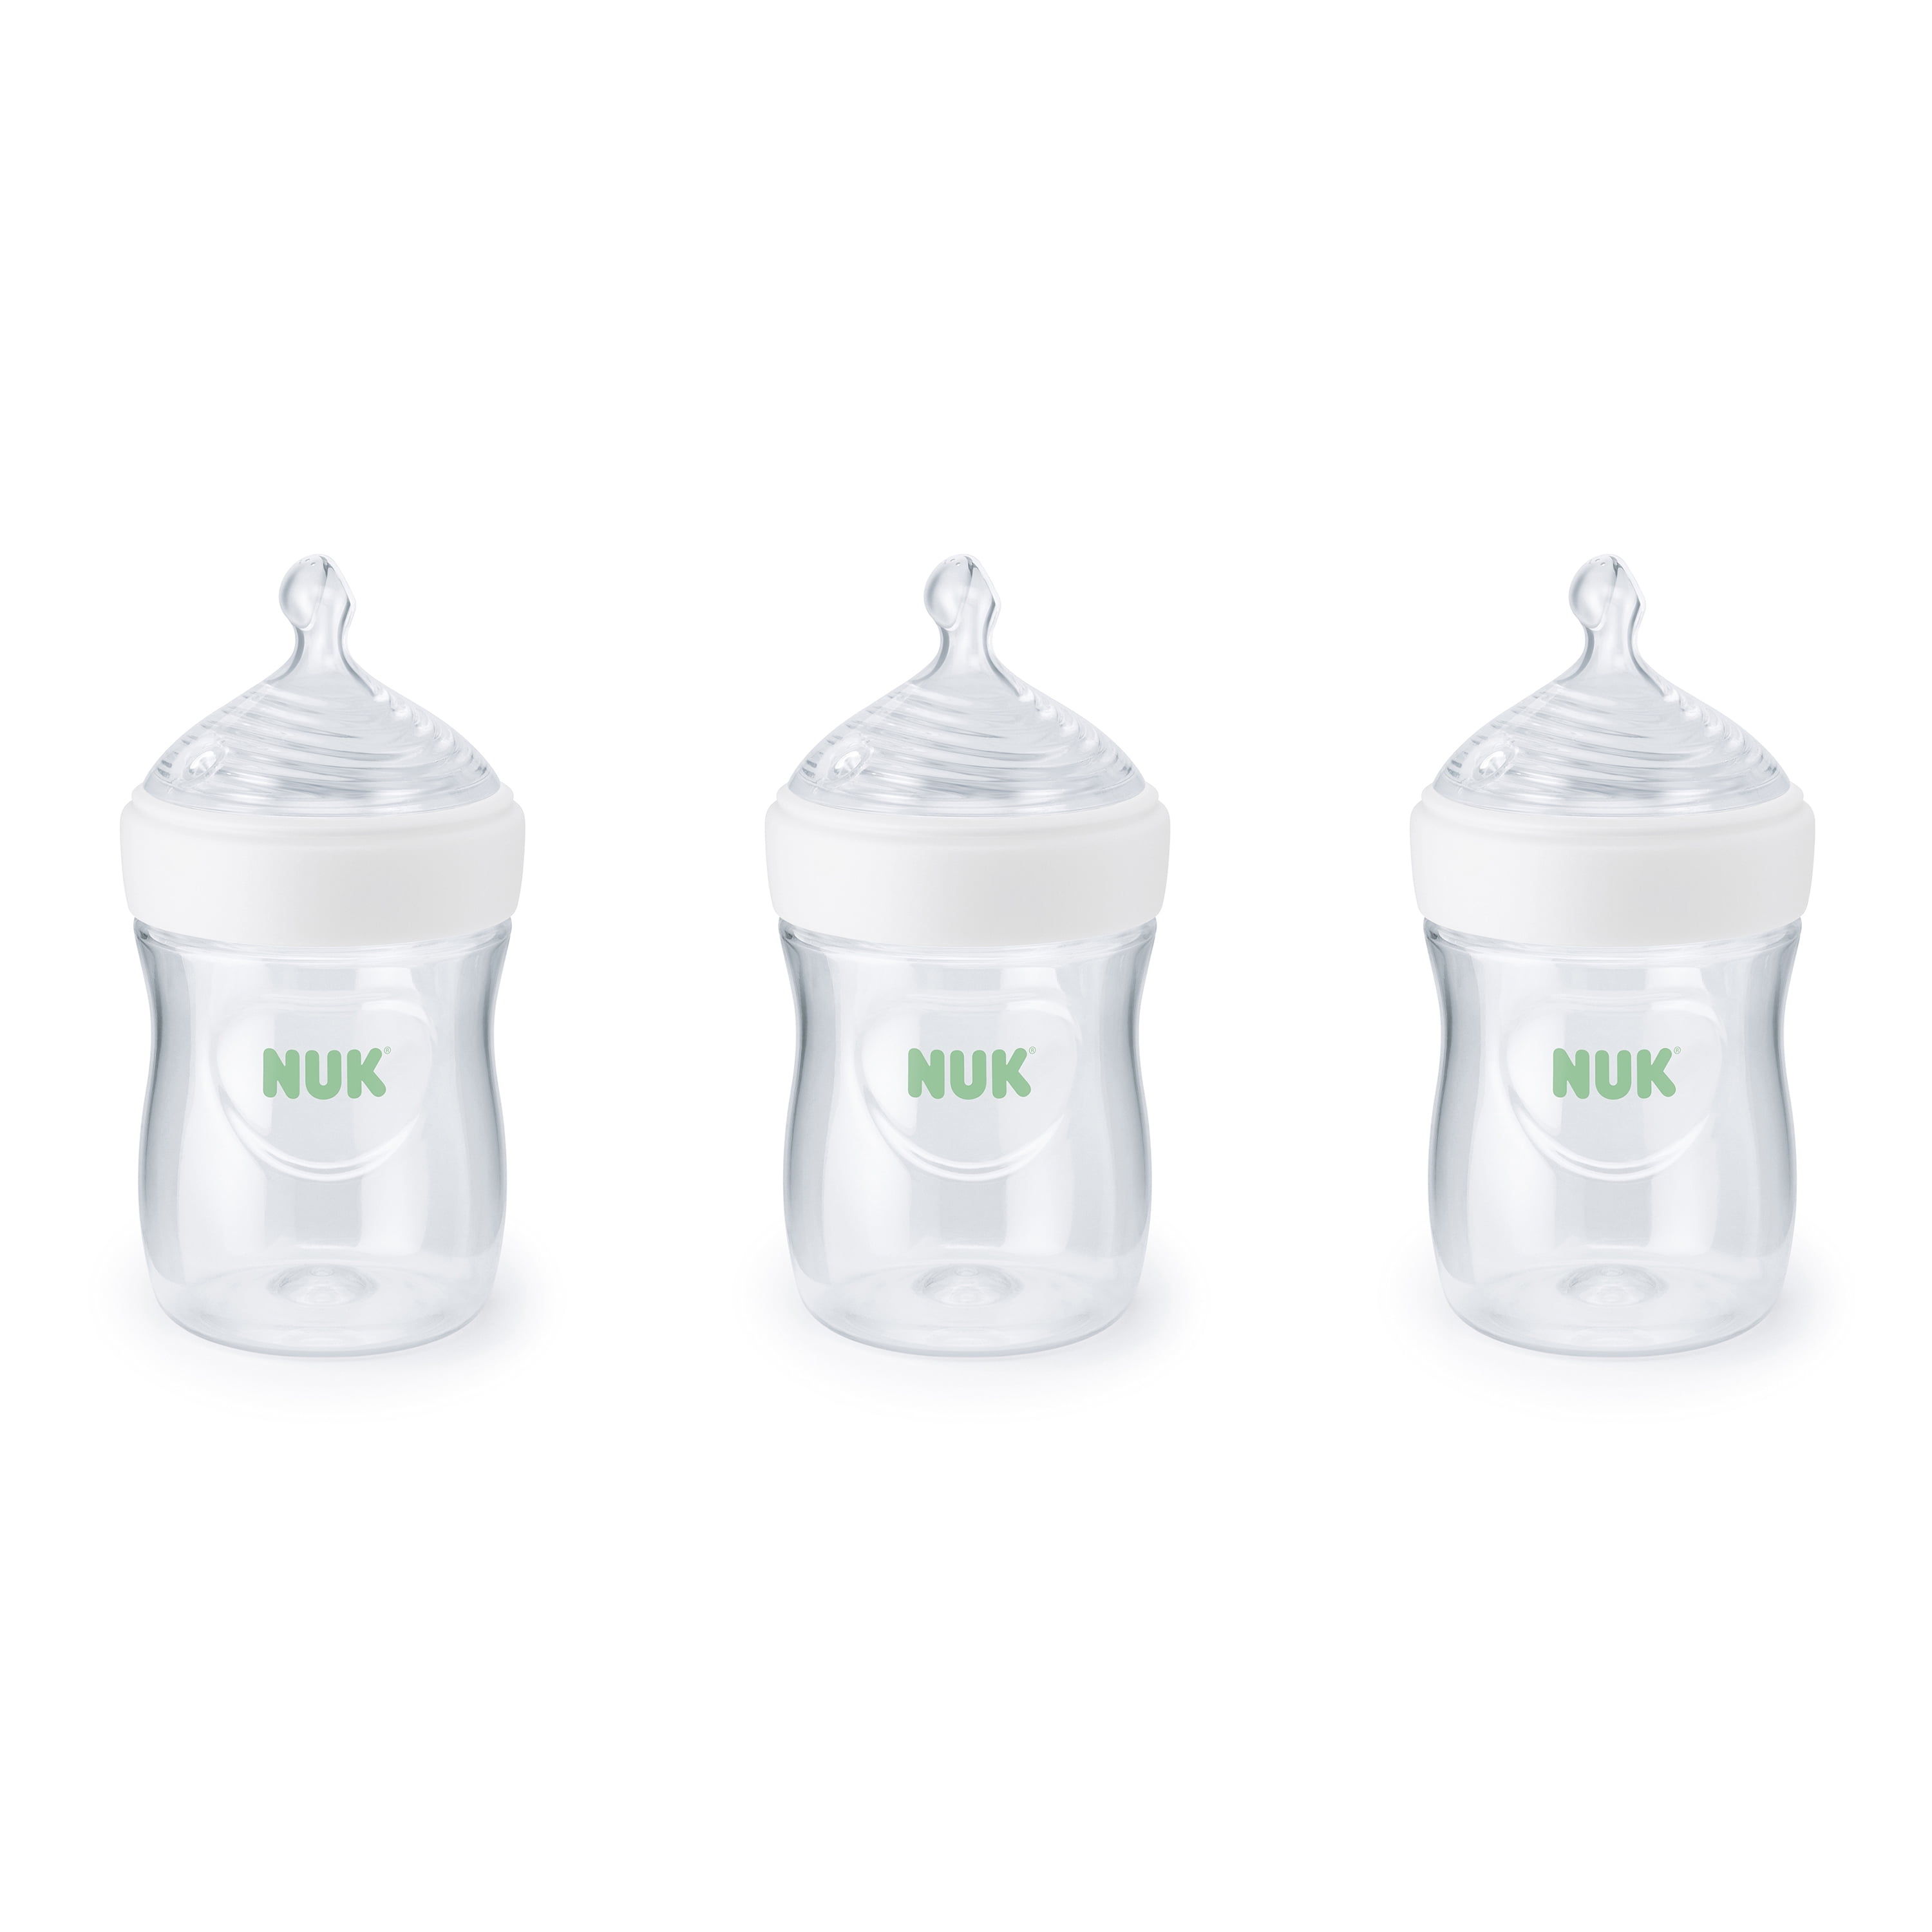 NUK Simply Natural with SafeTemp, 5 oz, 3 Pack, Clear Baby Bottles, Infant